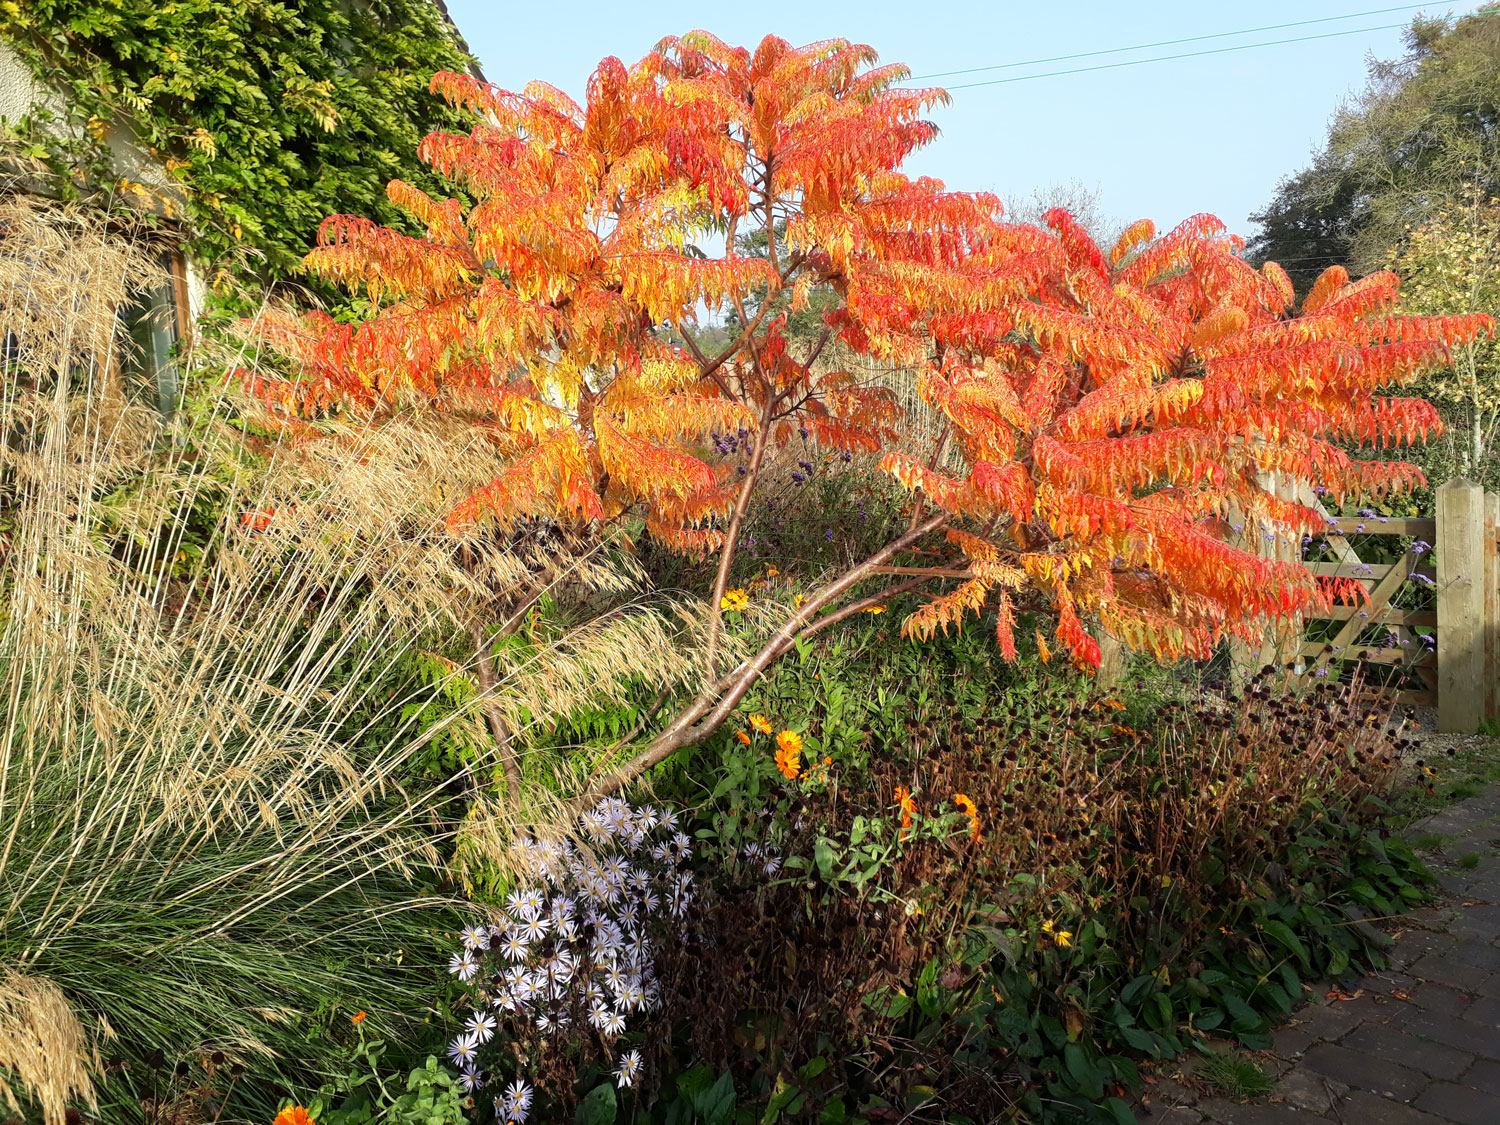 Garden featuring large sumac in autumn colours in foreground